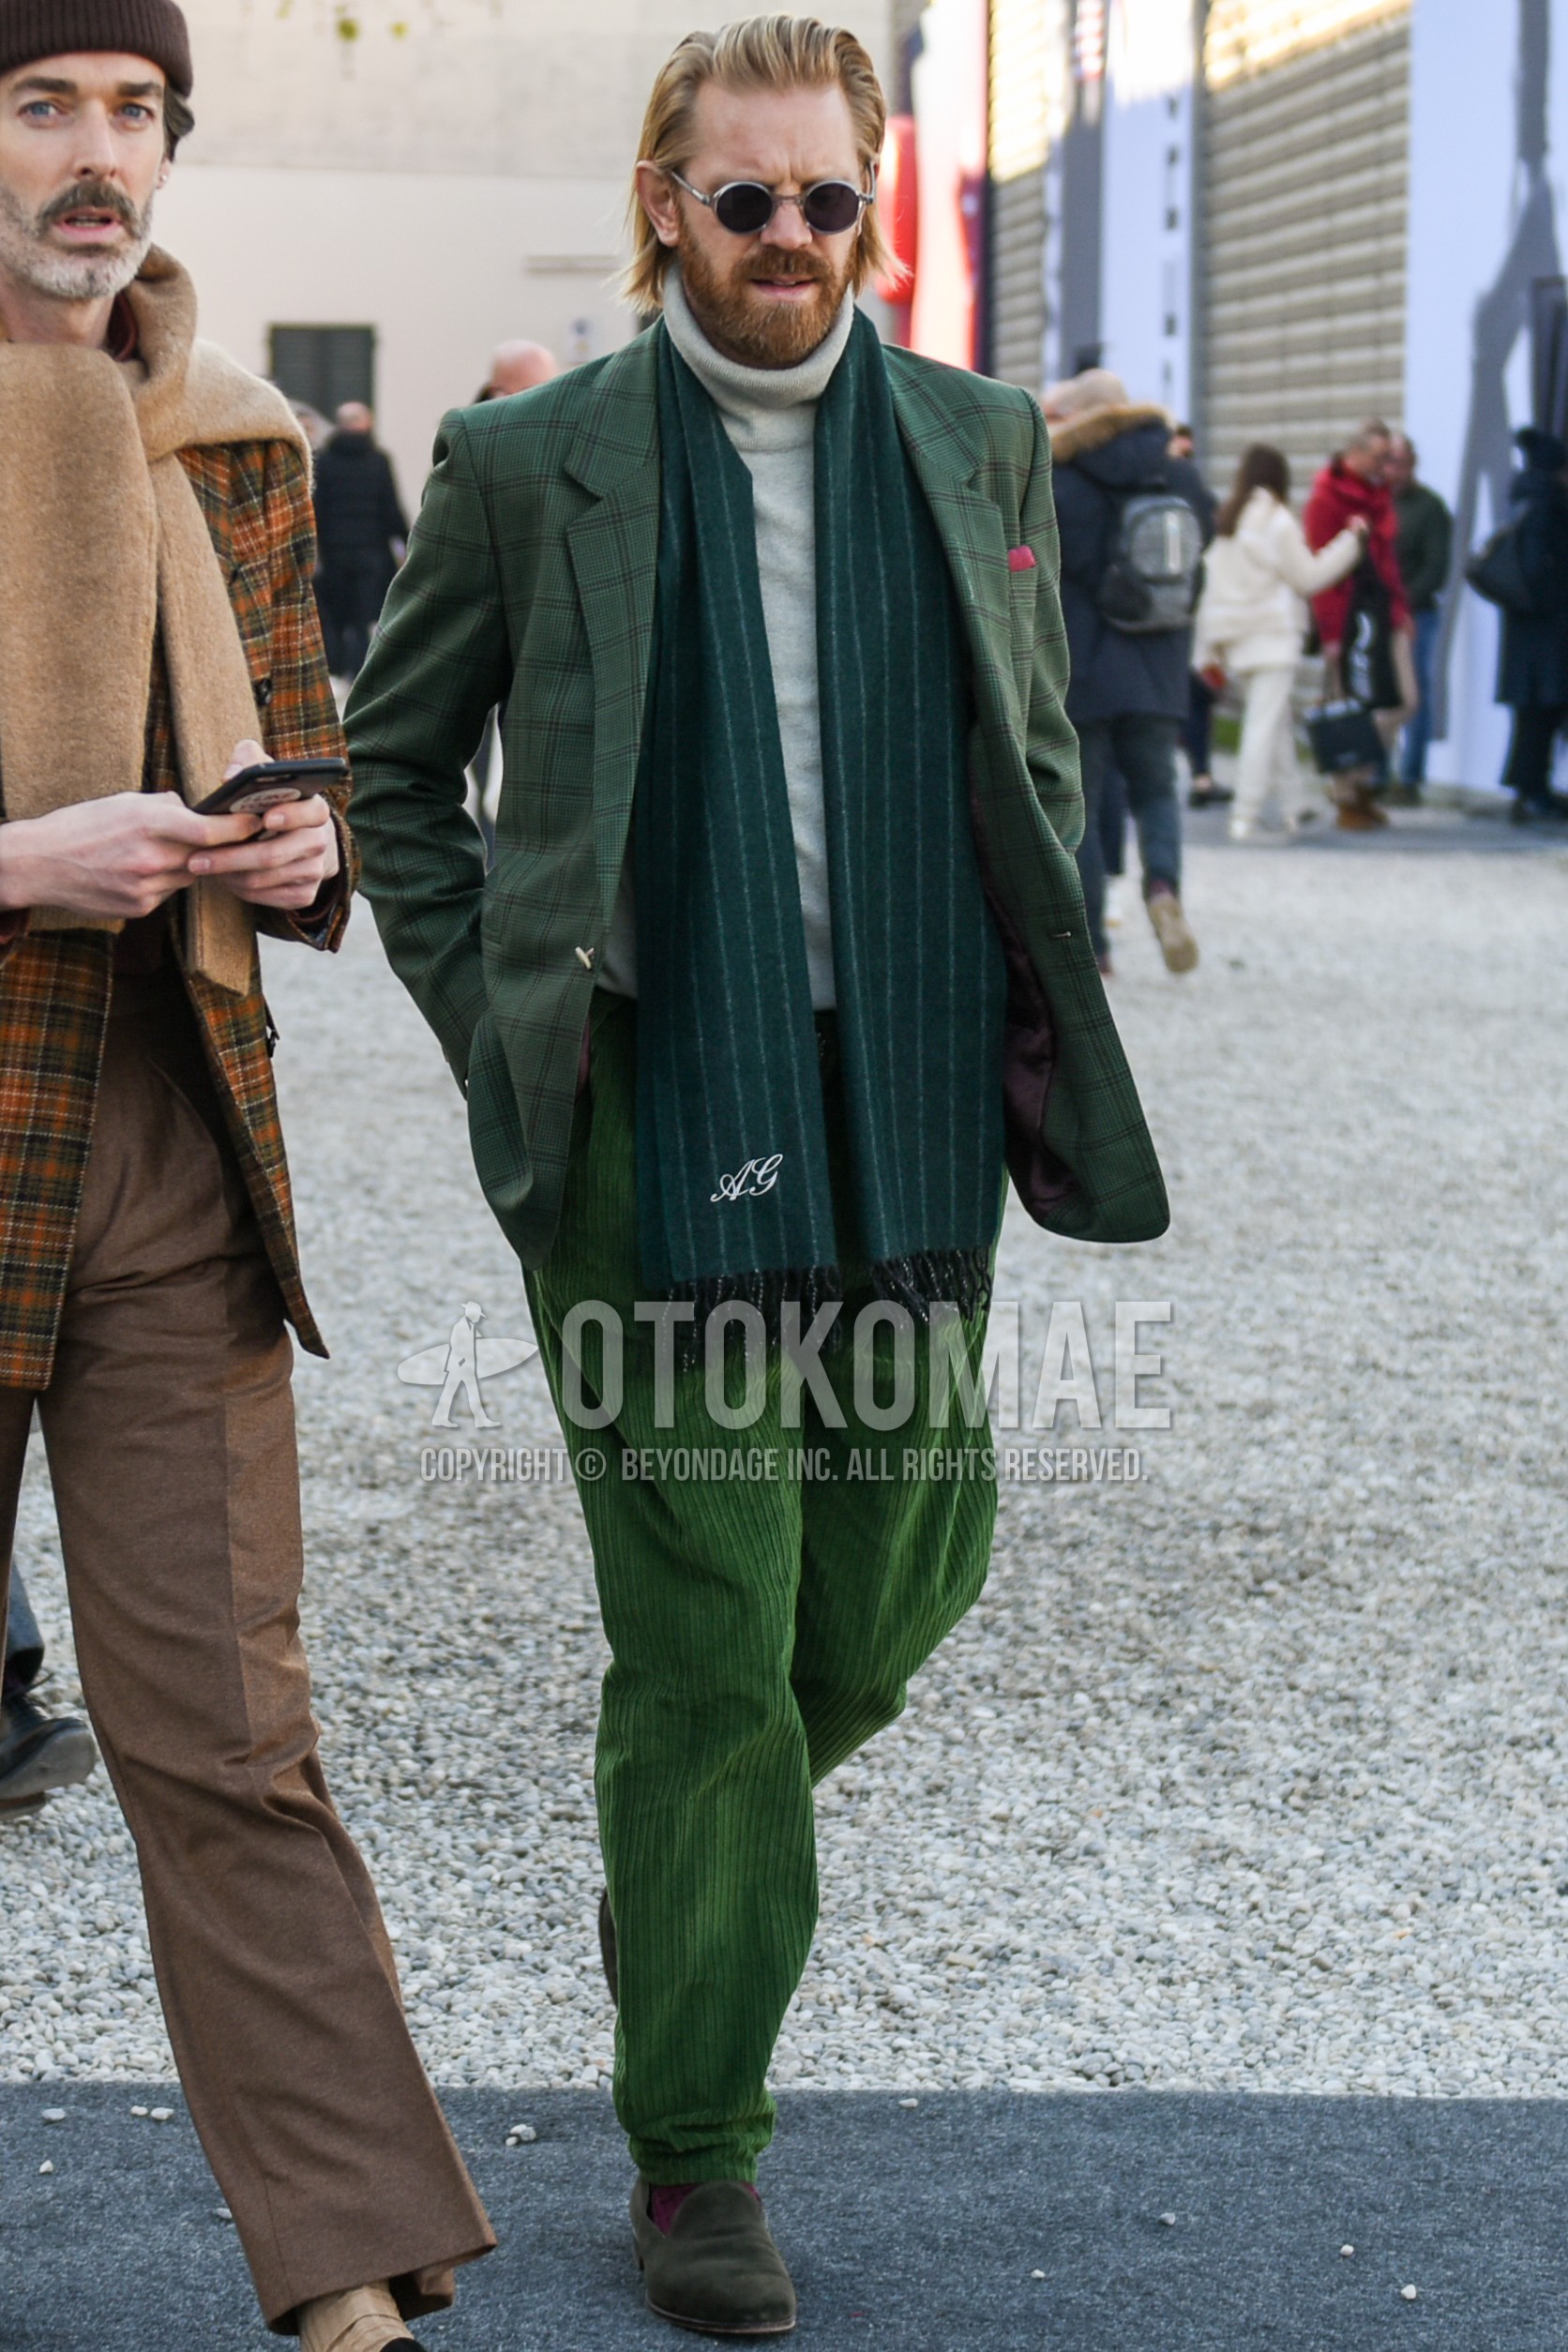 Men's autumn winter outfit with silver plain sunglasses, green stripes scarf, green check tailored jacket, white plain turtleneck knit, green plain winter pants (corduroy,velour), brown plain socks, green  loafers leather shoes.